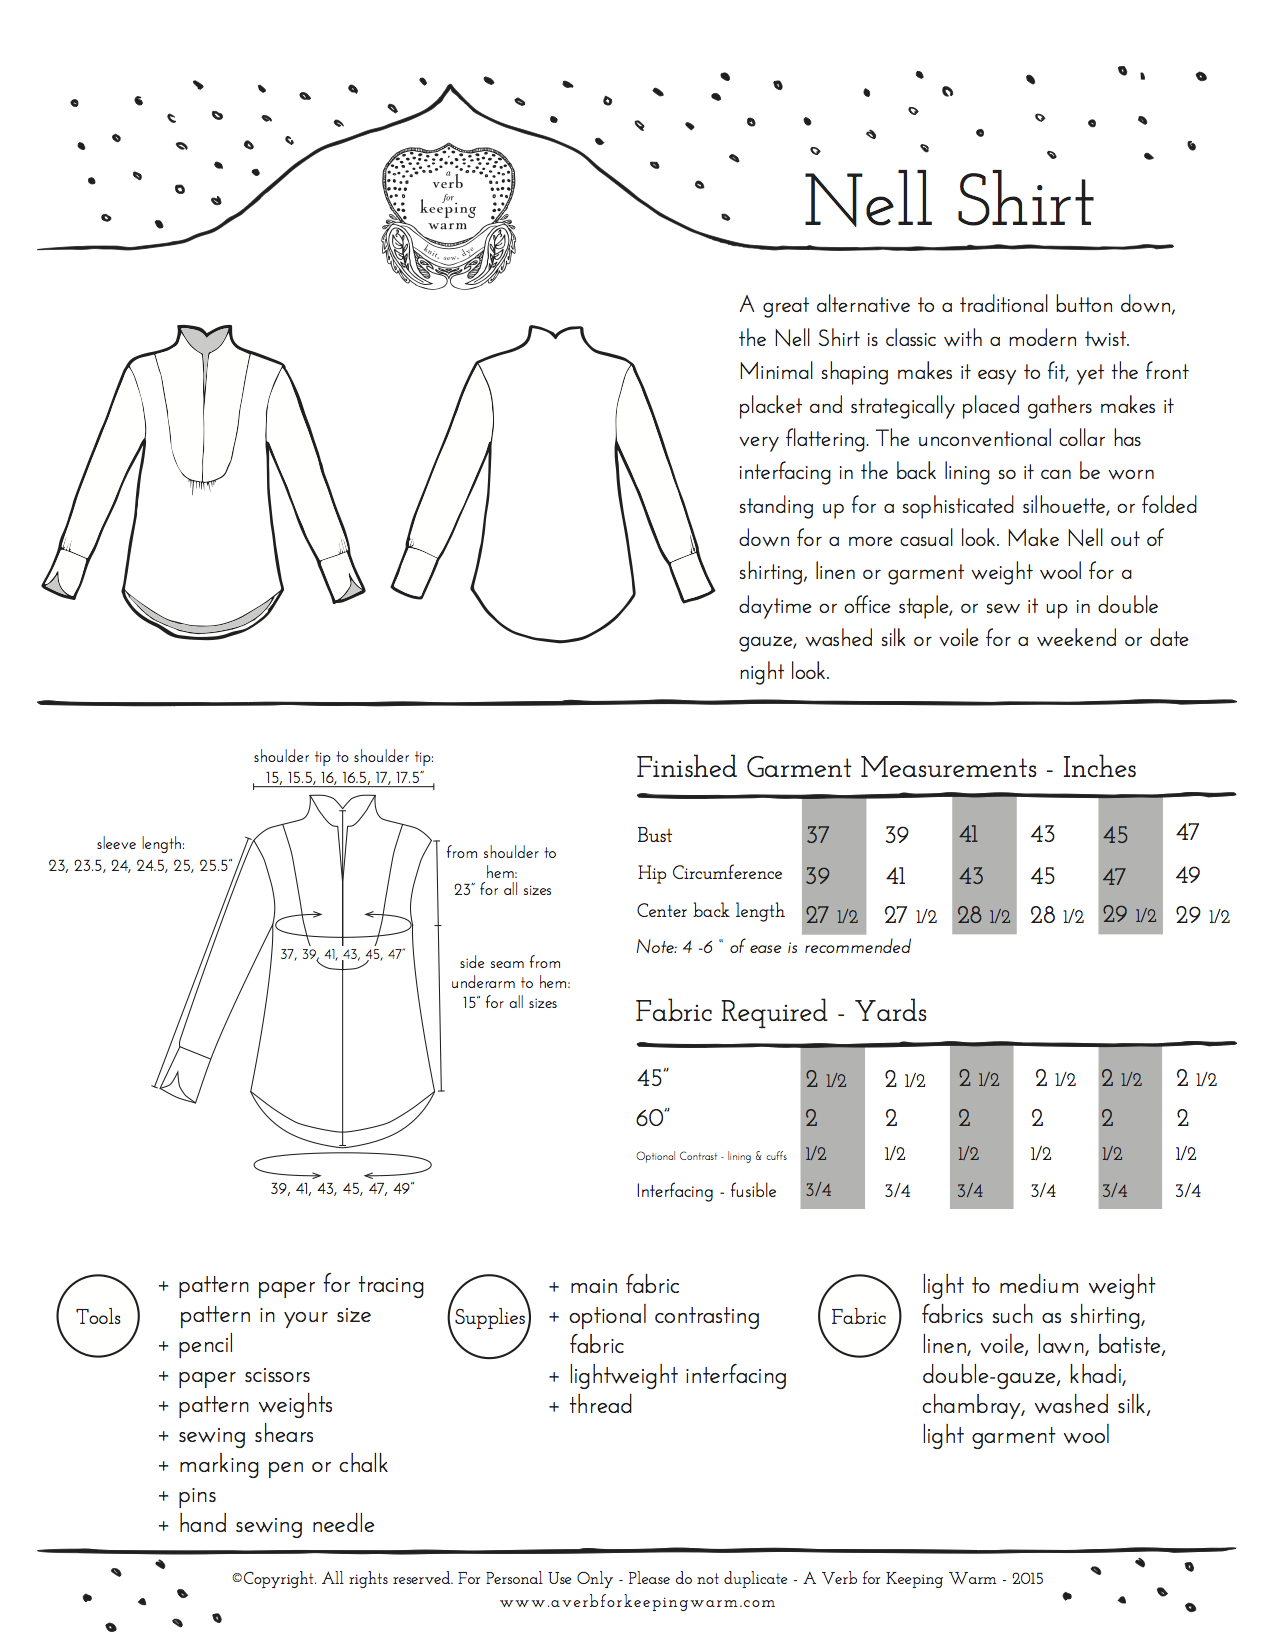 A Verb for Keeping Warm Nell Shirt